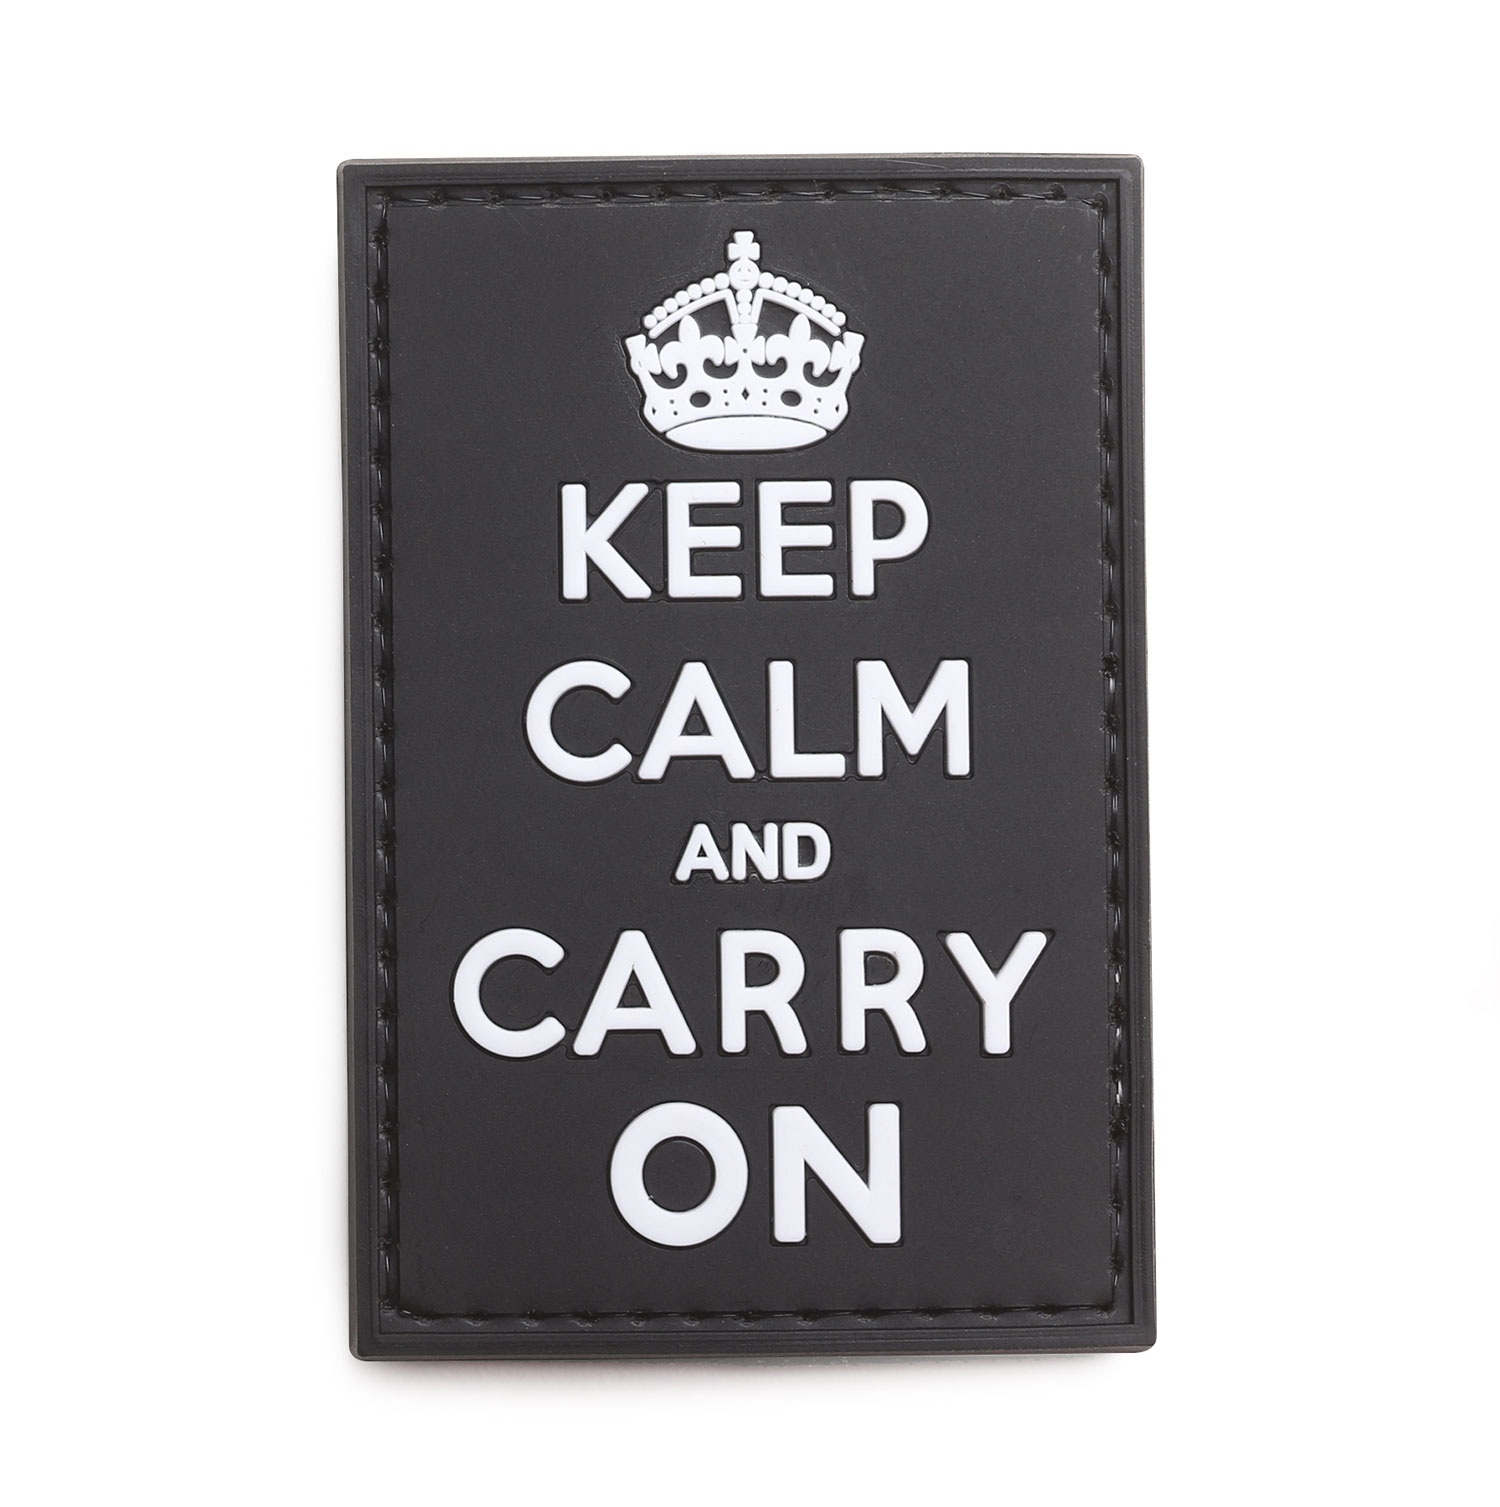 5ive Star Gear Keep Calm and Carry On Morale Patch